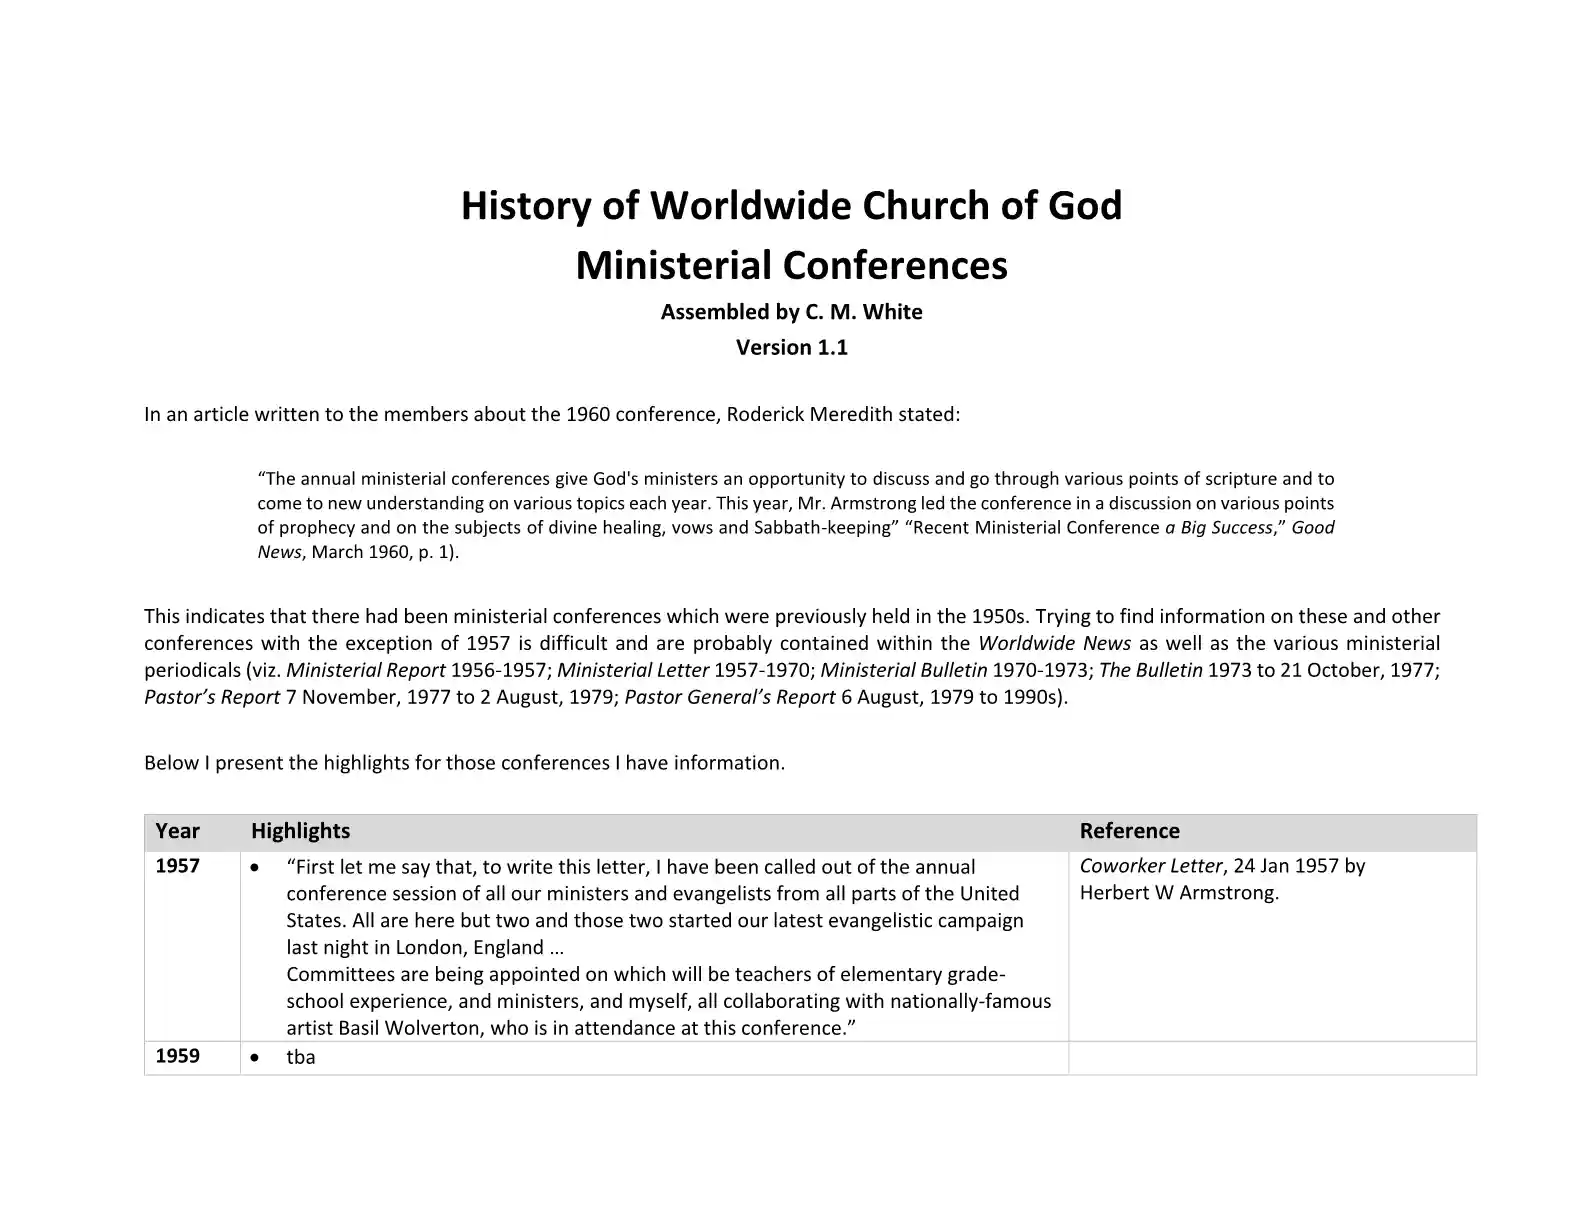 History of WCG Ministerial Conferences - Page 11